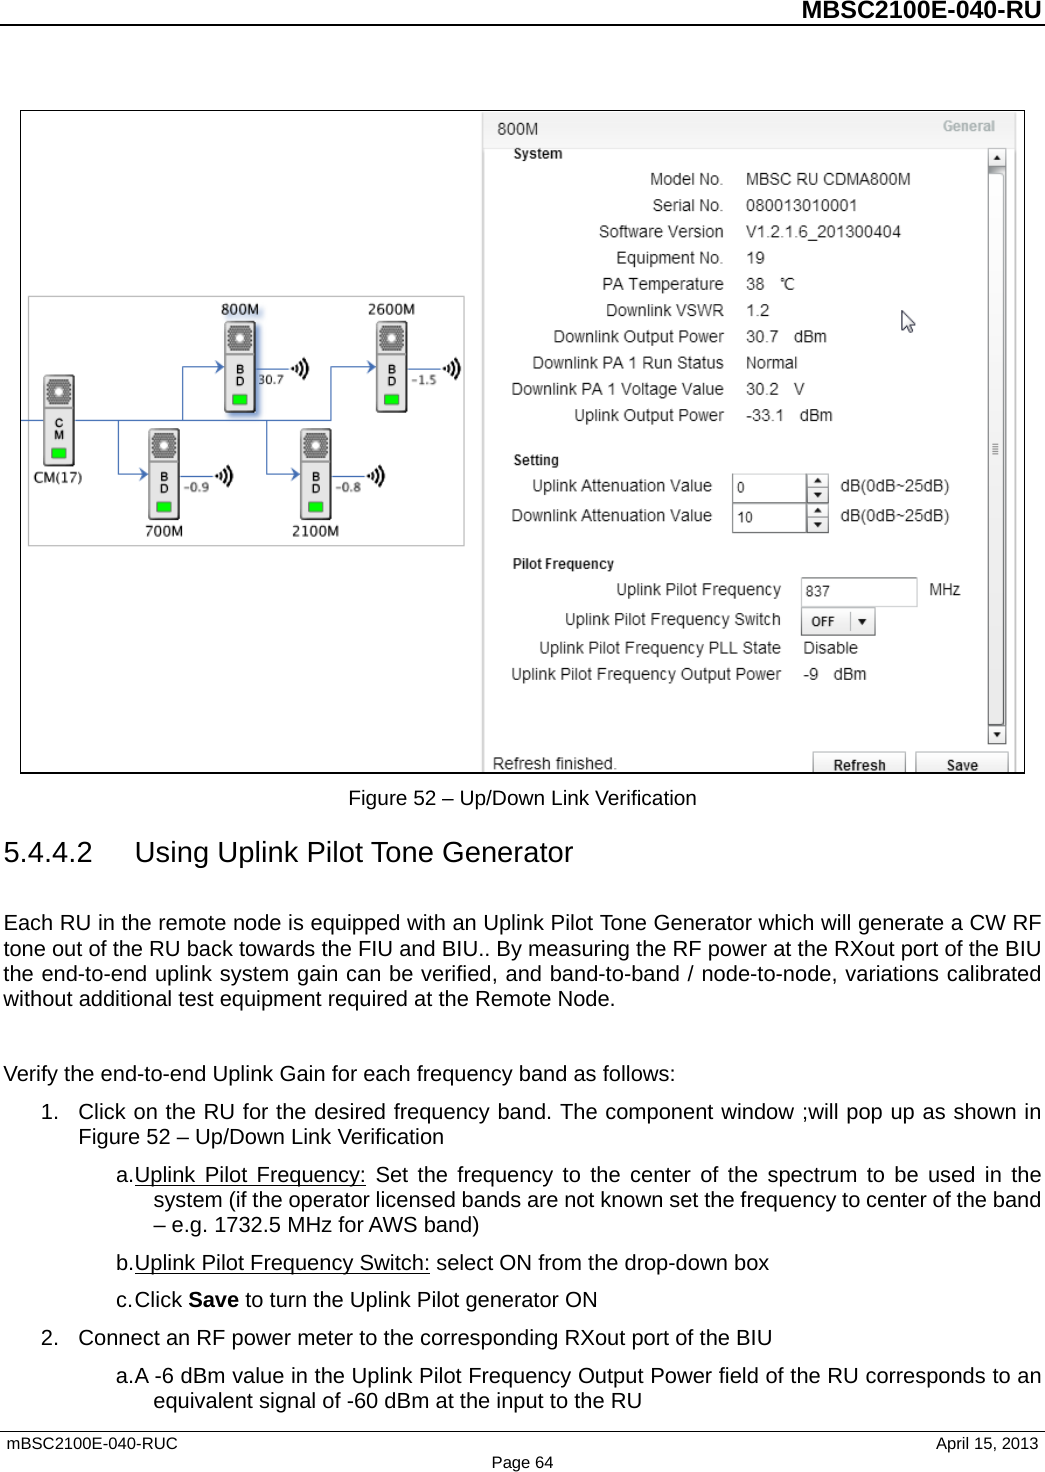          MBSC2100E-040-RU   mBSC2100E-040-RUC                                     April 15, 2013 Page 64  Figure 52 – Up/Down Link Verification 5.4.4.2 Using Uplink Pilot Tone Generator Each RU in the remote node is equipped with an Uplink Pilot Tone Generator which will generate a CW RF tone out of the RU back towards the FIU and BIU.. By measuring the RF power at the RXout port of the BIU the end-to-end uplink system gain can be verified, and band-to-band / node-to-node, variations calibrated without additional test equipment required at the Remote Node.  Verify the end-to-end Uplink Gain for each frequency band as follows: 1. Click on the RU for the desired frequency band. The component window ;will pop up as shown in Figure 52 – Up/Down Link Verification a. Uplink Pilot Frequency: Set the frequency to the center of the spectrum to be used in the system (if the operator licensed bands are not known set the frequency to center of the band – e.g. 1732.5 MHz for AWS band) b. Uplink Pilot Frequency Switch: select ON from the drop-down box c. Click Save to turn the Uplink Pilot generator ON 2. Connect an RF power meter to the corresponding RXout port of the BIU a. A -6 dBm value in the Uplink Pilot Frequency Output Power field of the RU corresponds to an equivalent signal of -60 dBm at the input to the RU 